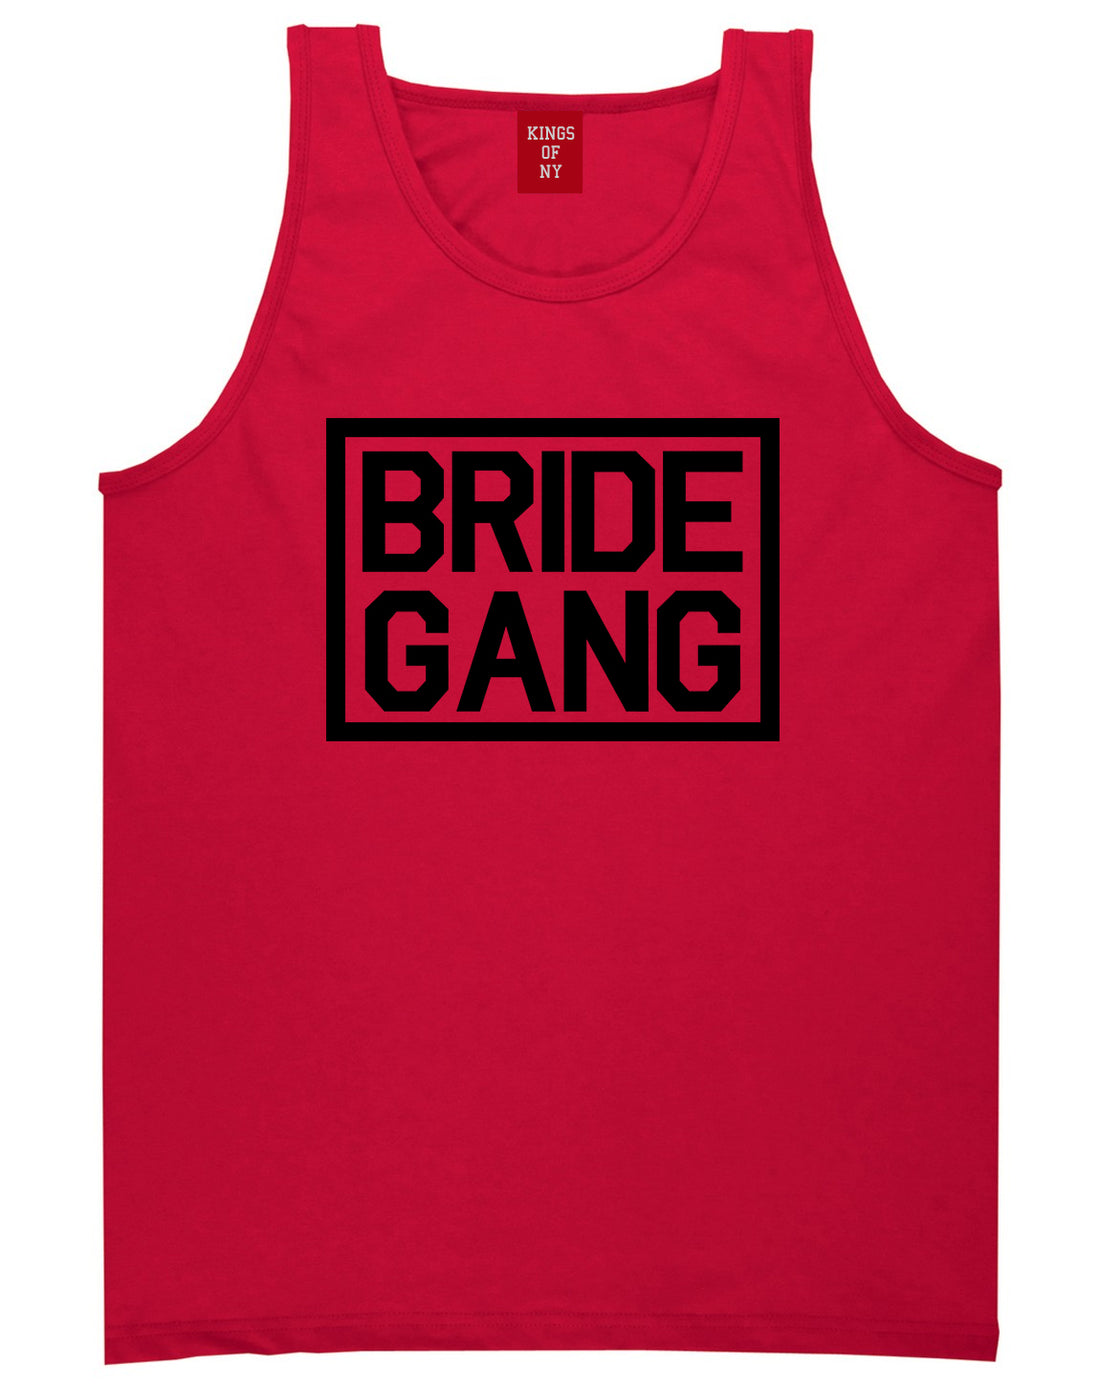 Bride Gang Bachlorette Party Red Tank Top Shirt by Kings Of NY